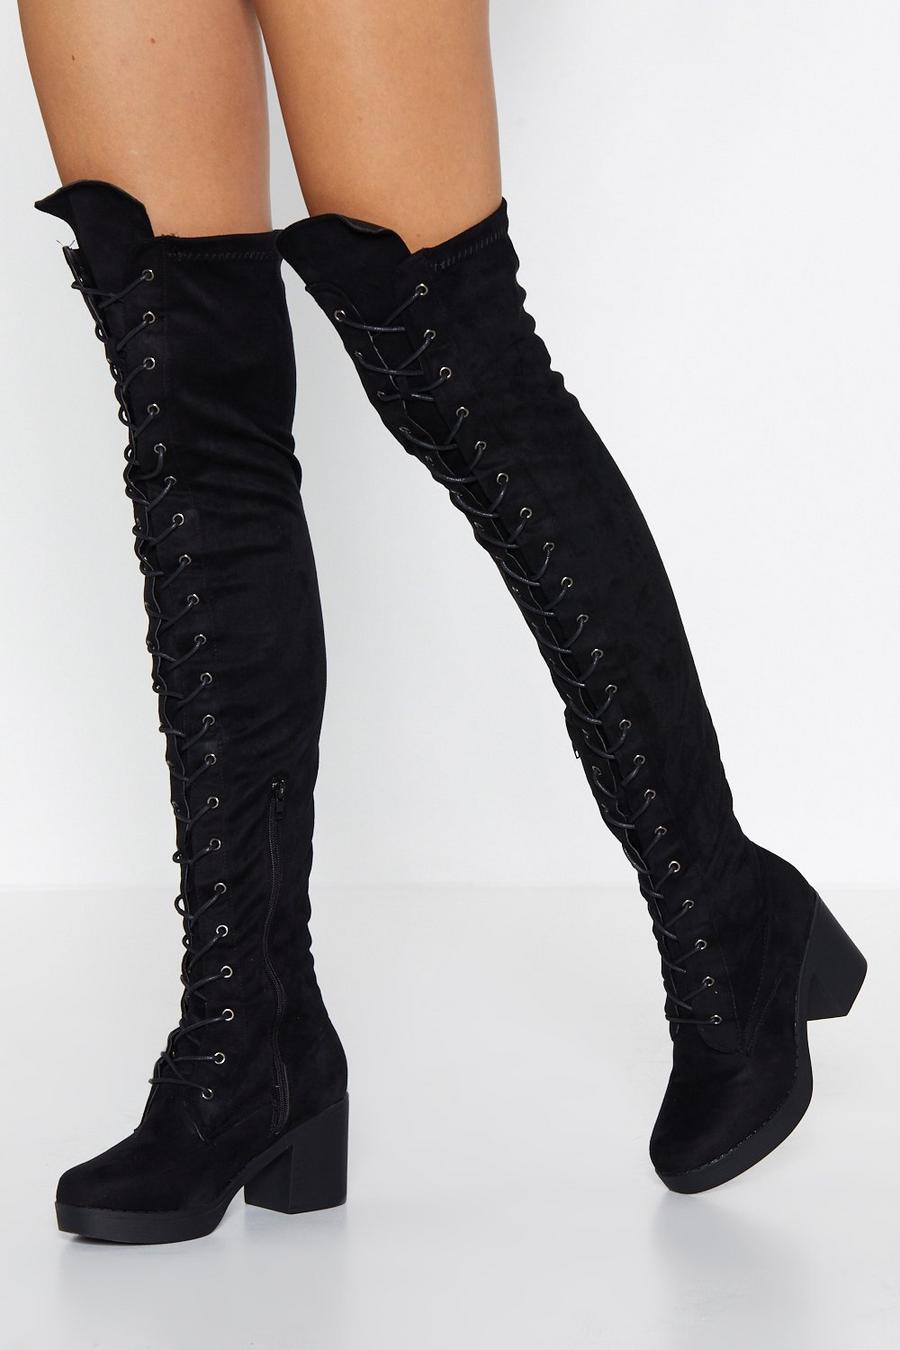 Lace Up Over the Knee Boots | Boohoo UK